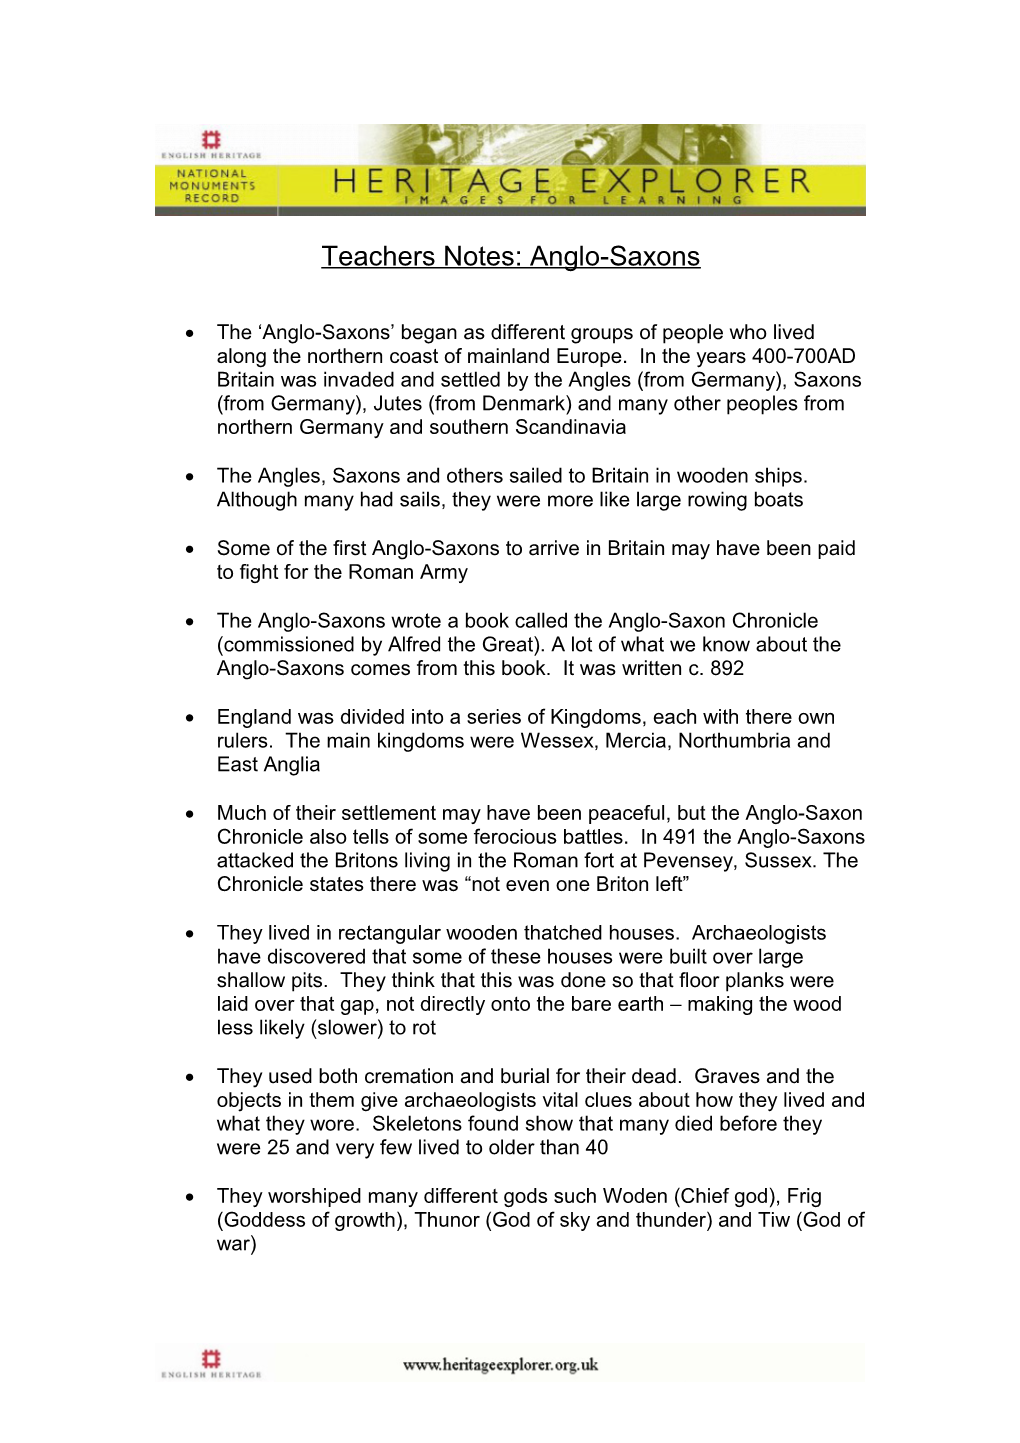 Teachers Notes: Anglo-Saxons